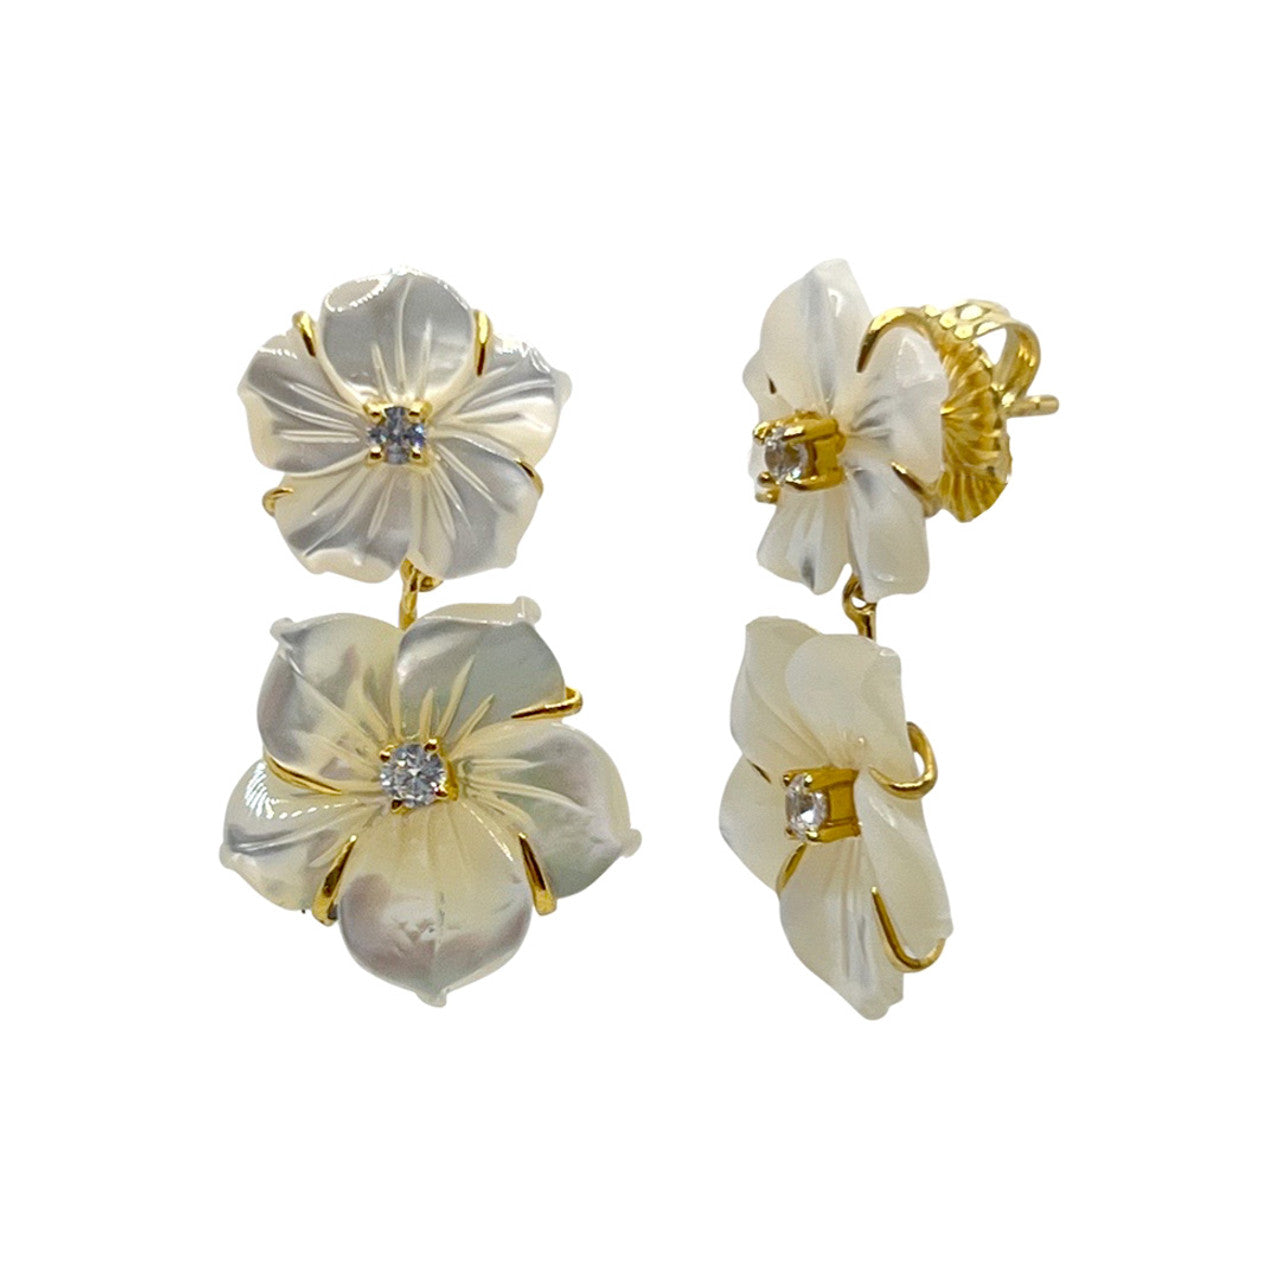 Carved Mother of Pearl Floral Earrings